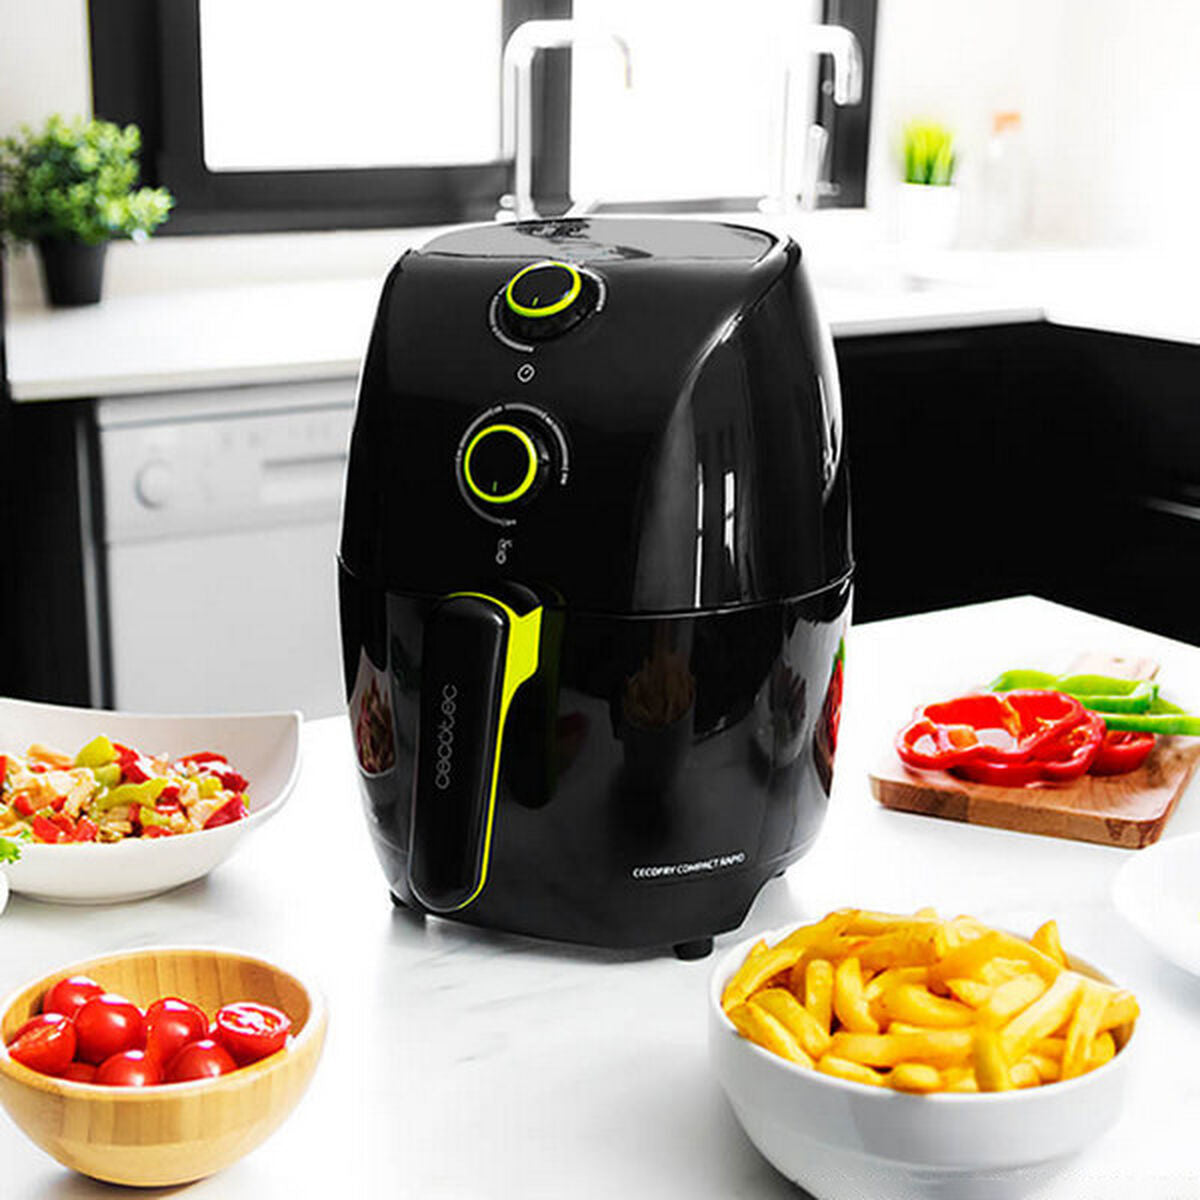 Fritteuse ohne Öl Cecotec Cecofry Compact Rapid (1,5 L) 900 W - CA International  